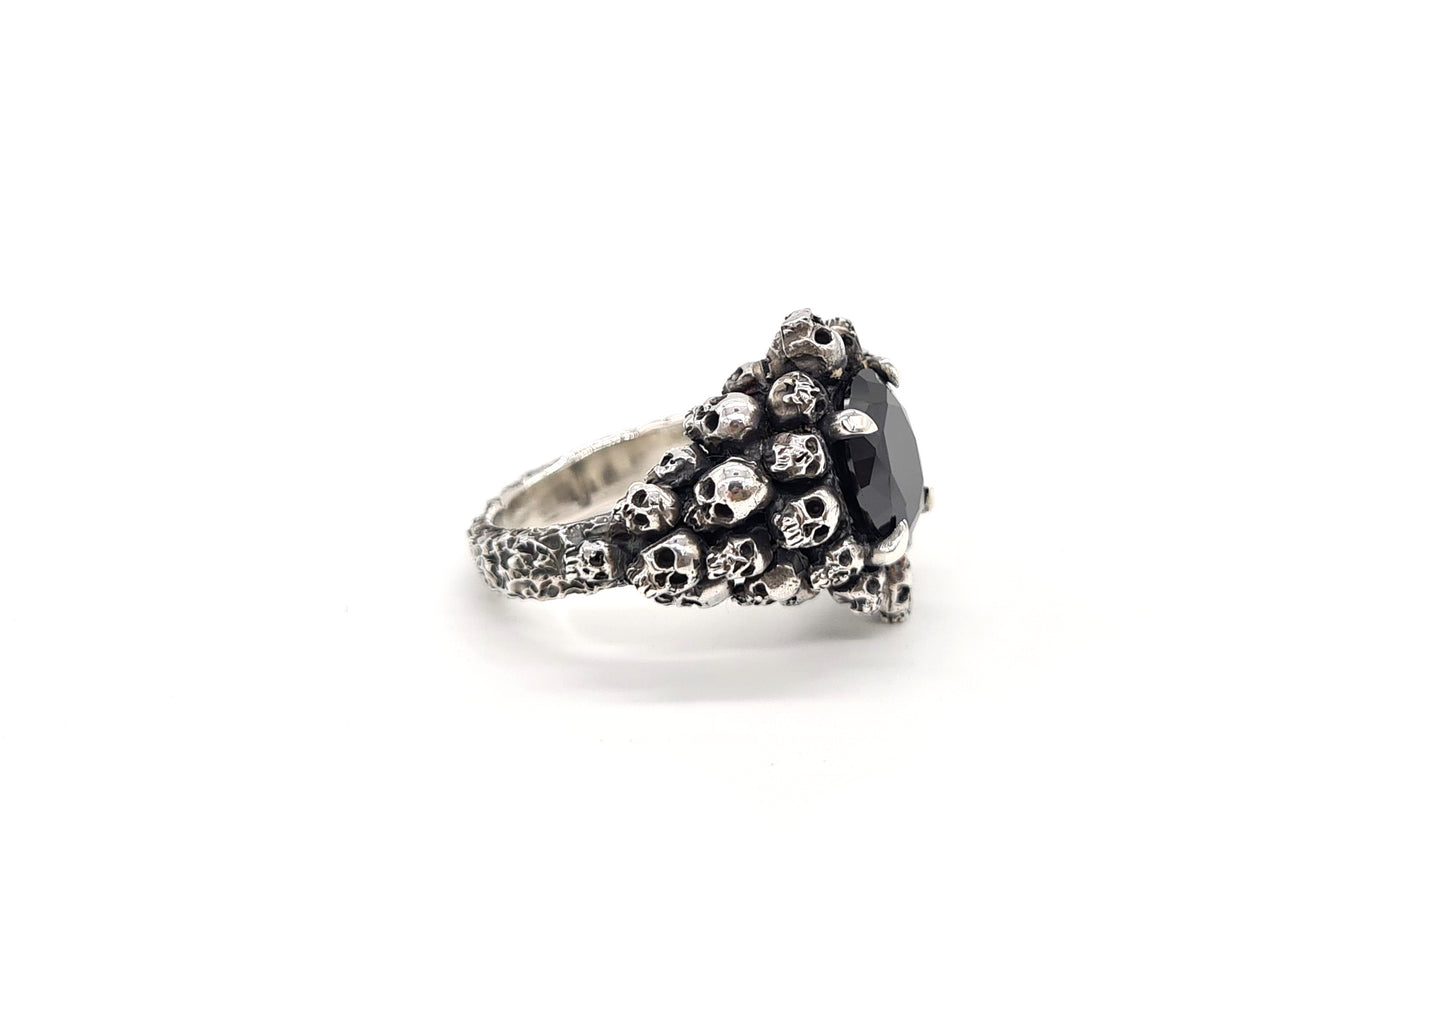 Catacombs Ring